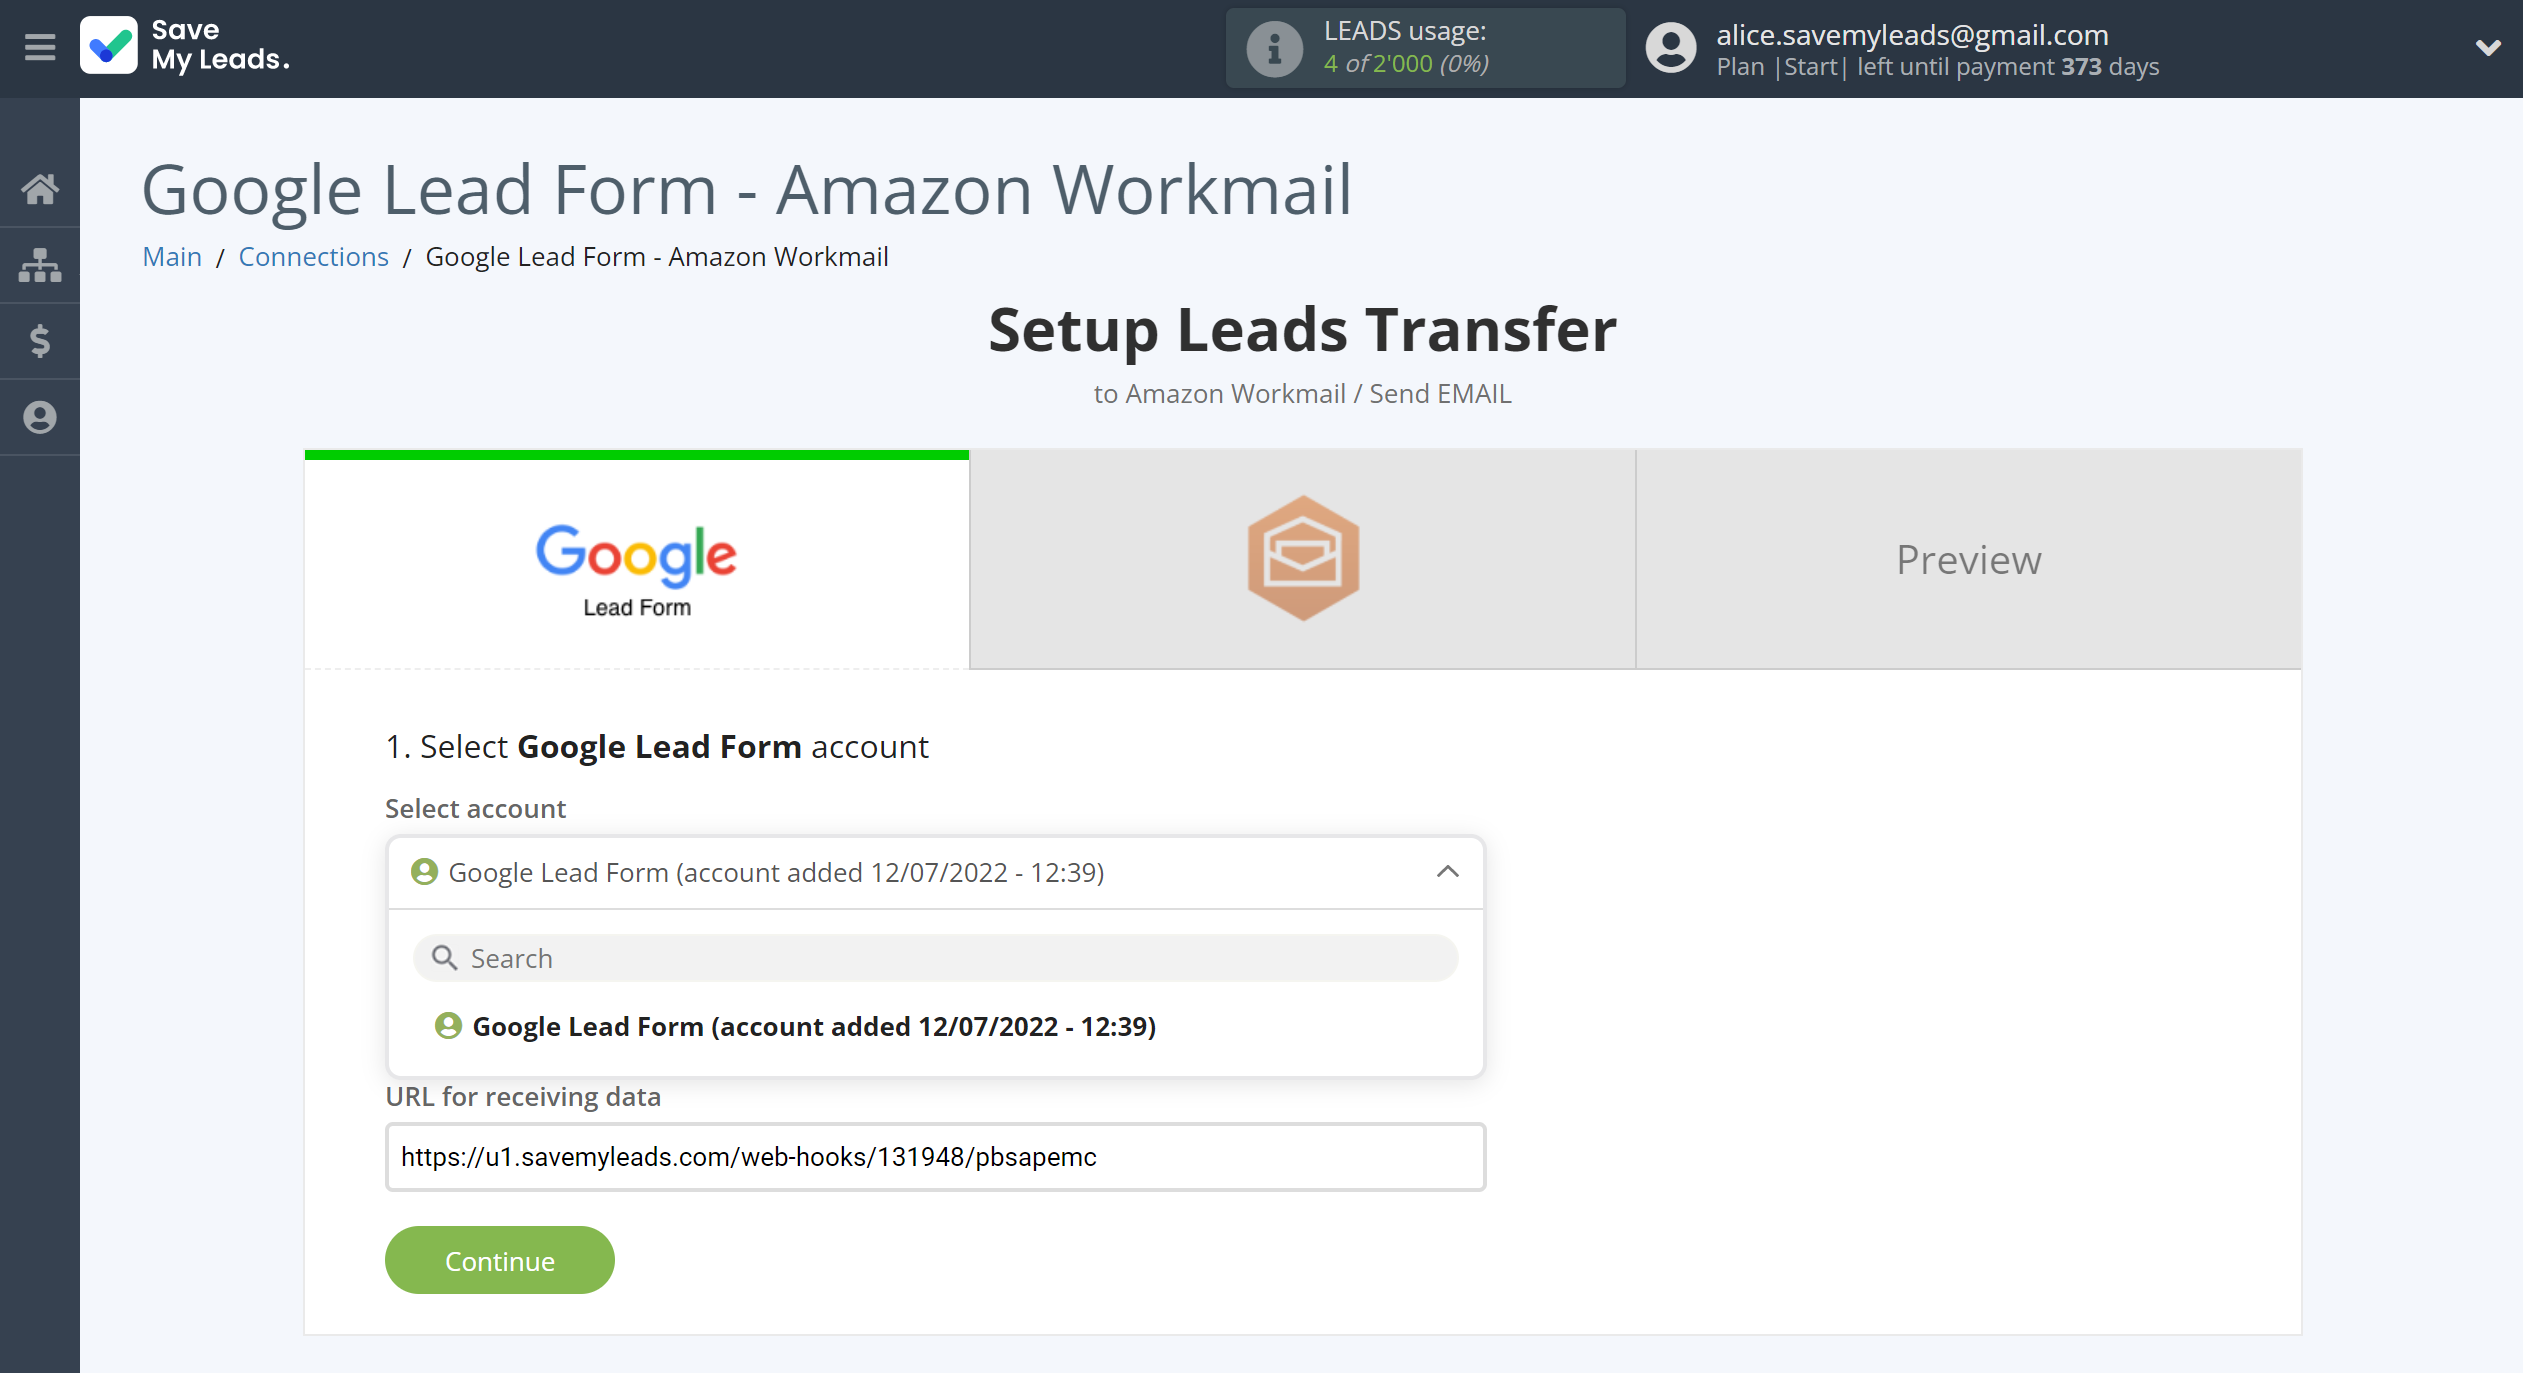 How to Connect Google Lead Form with Amazon Workmail | Data Source account selection